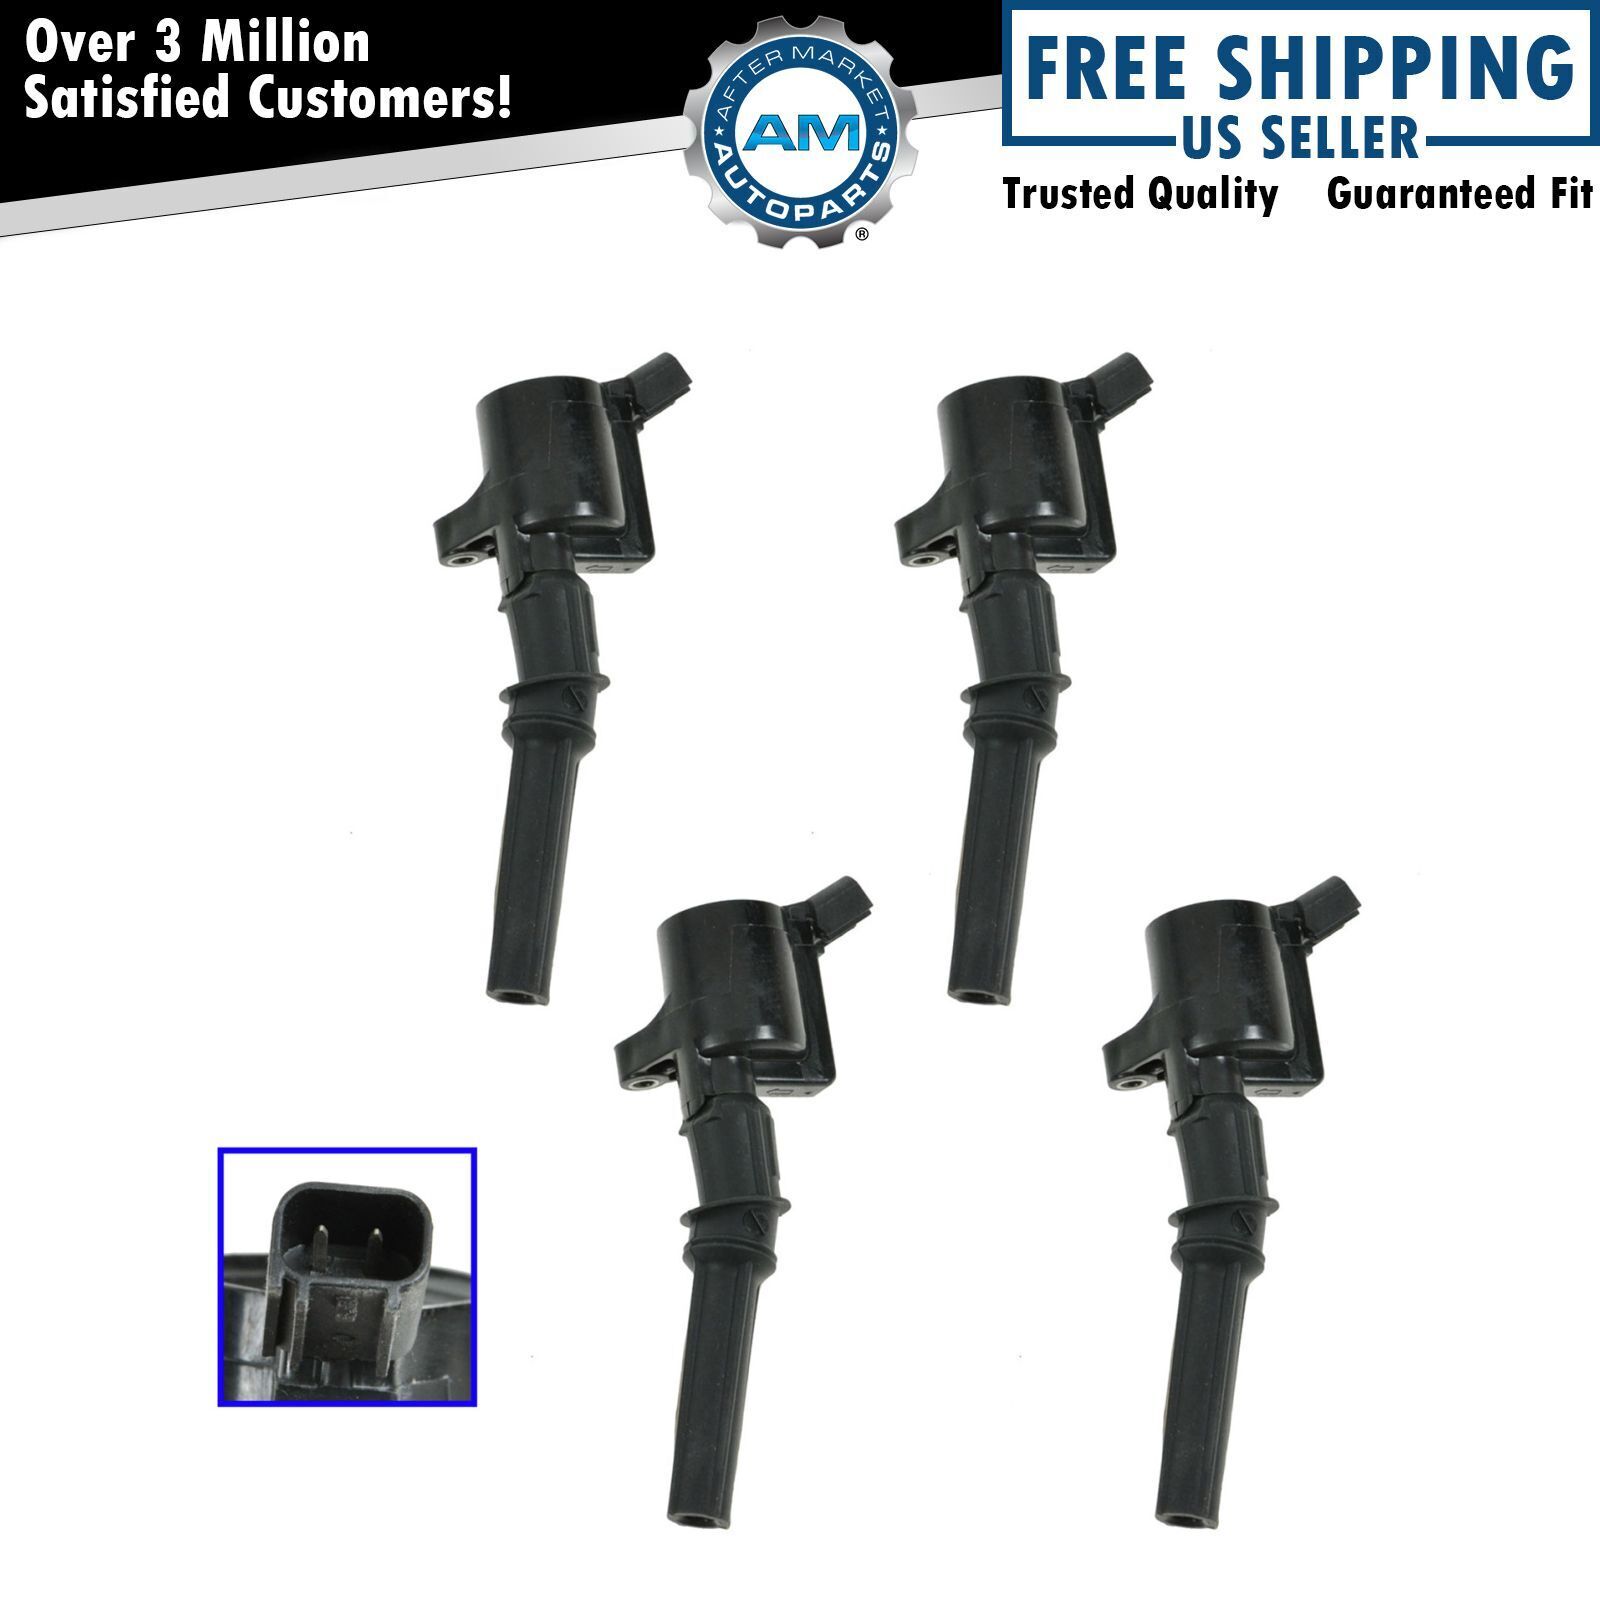 Ignition Coil Pack Set of 4 for Ford Crown Victoria Expedition Explorer Mustang